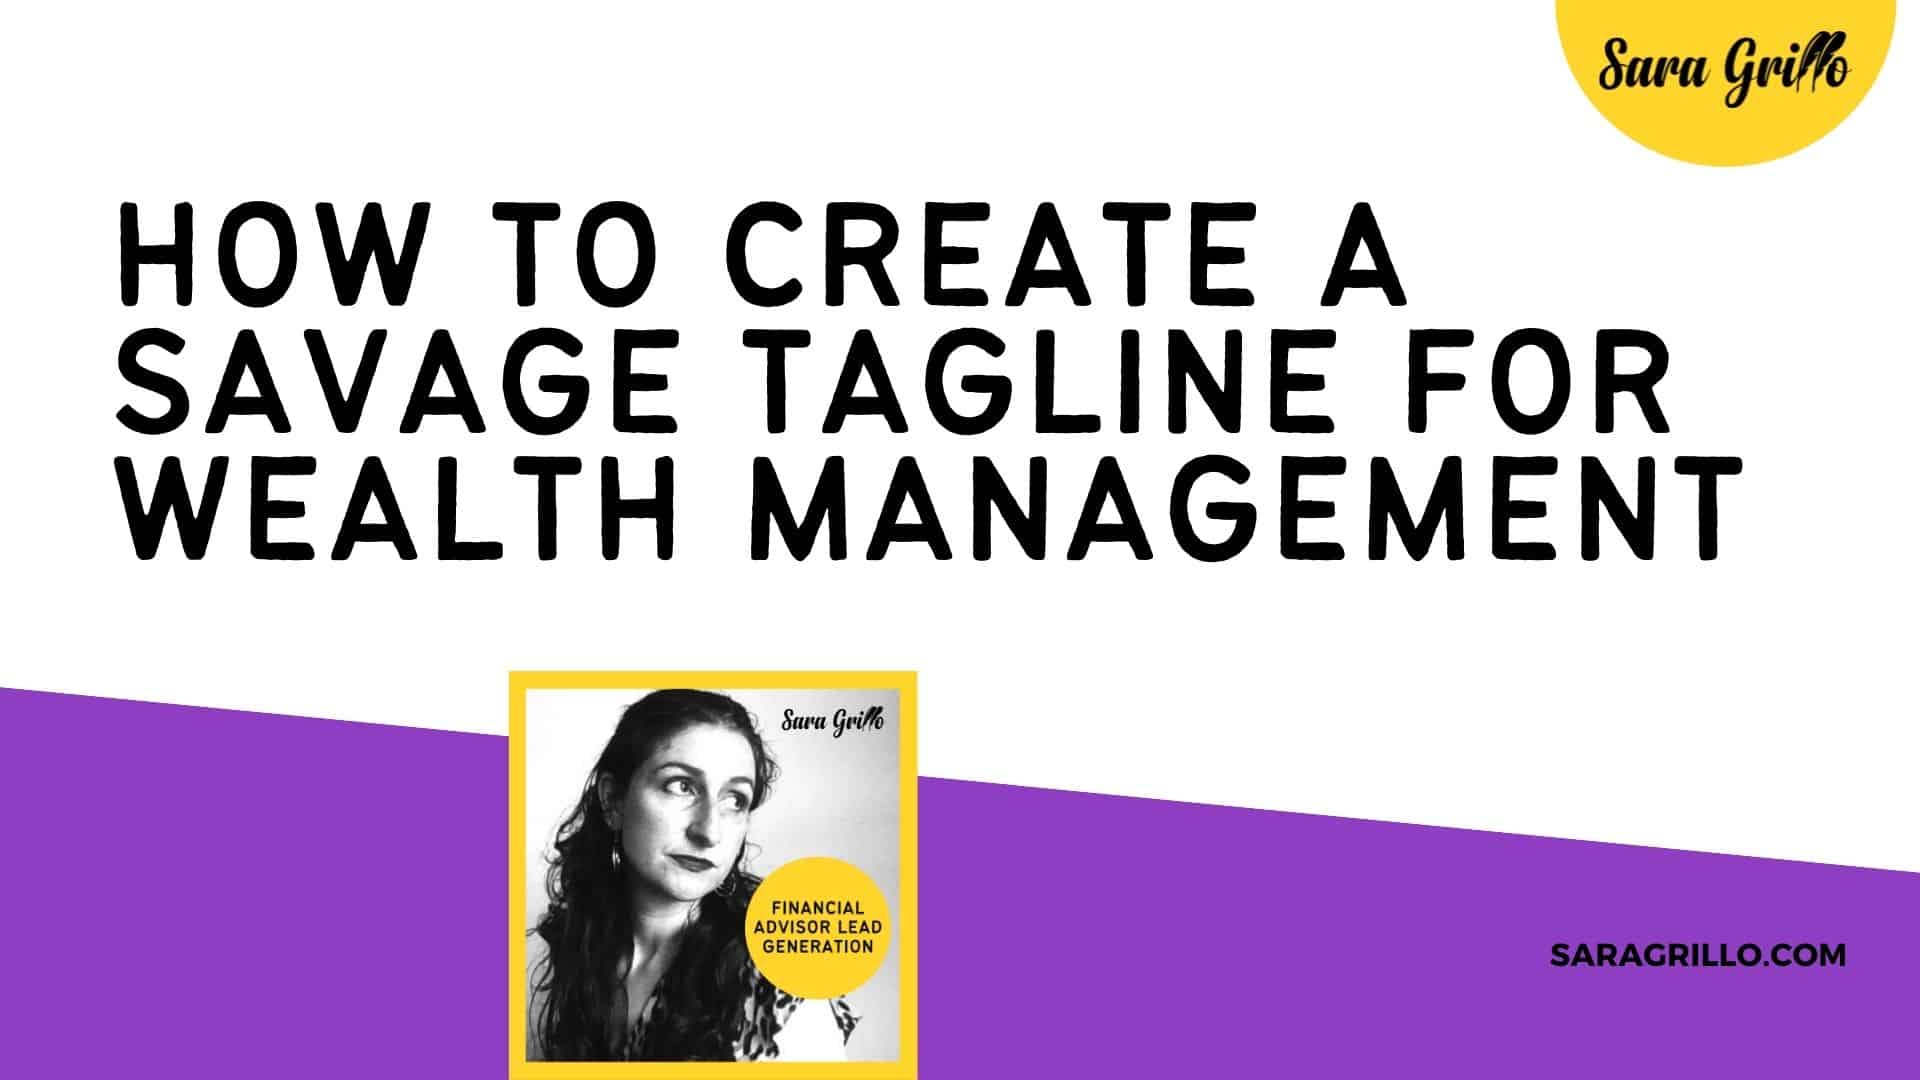 This blog talks about how to create a savage tagline for wealth management